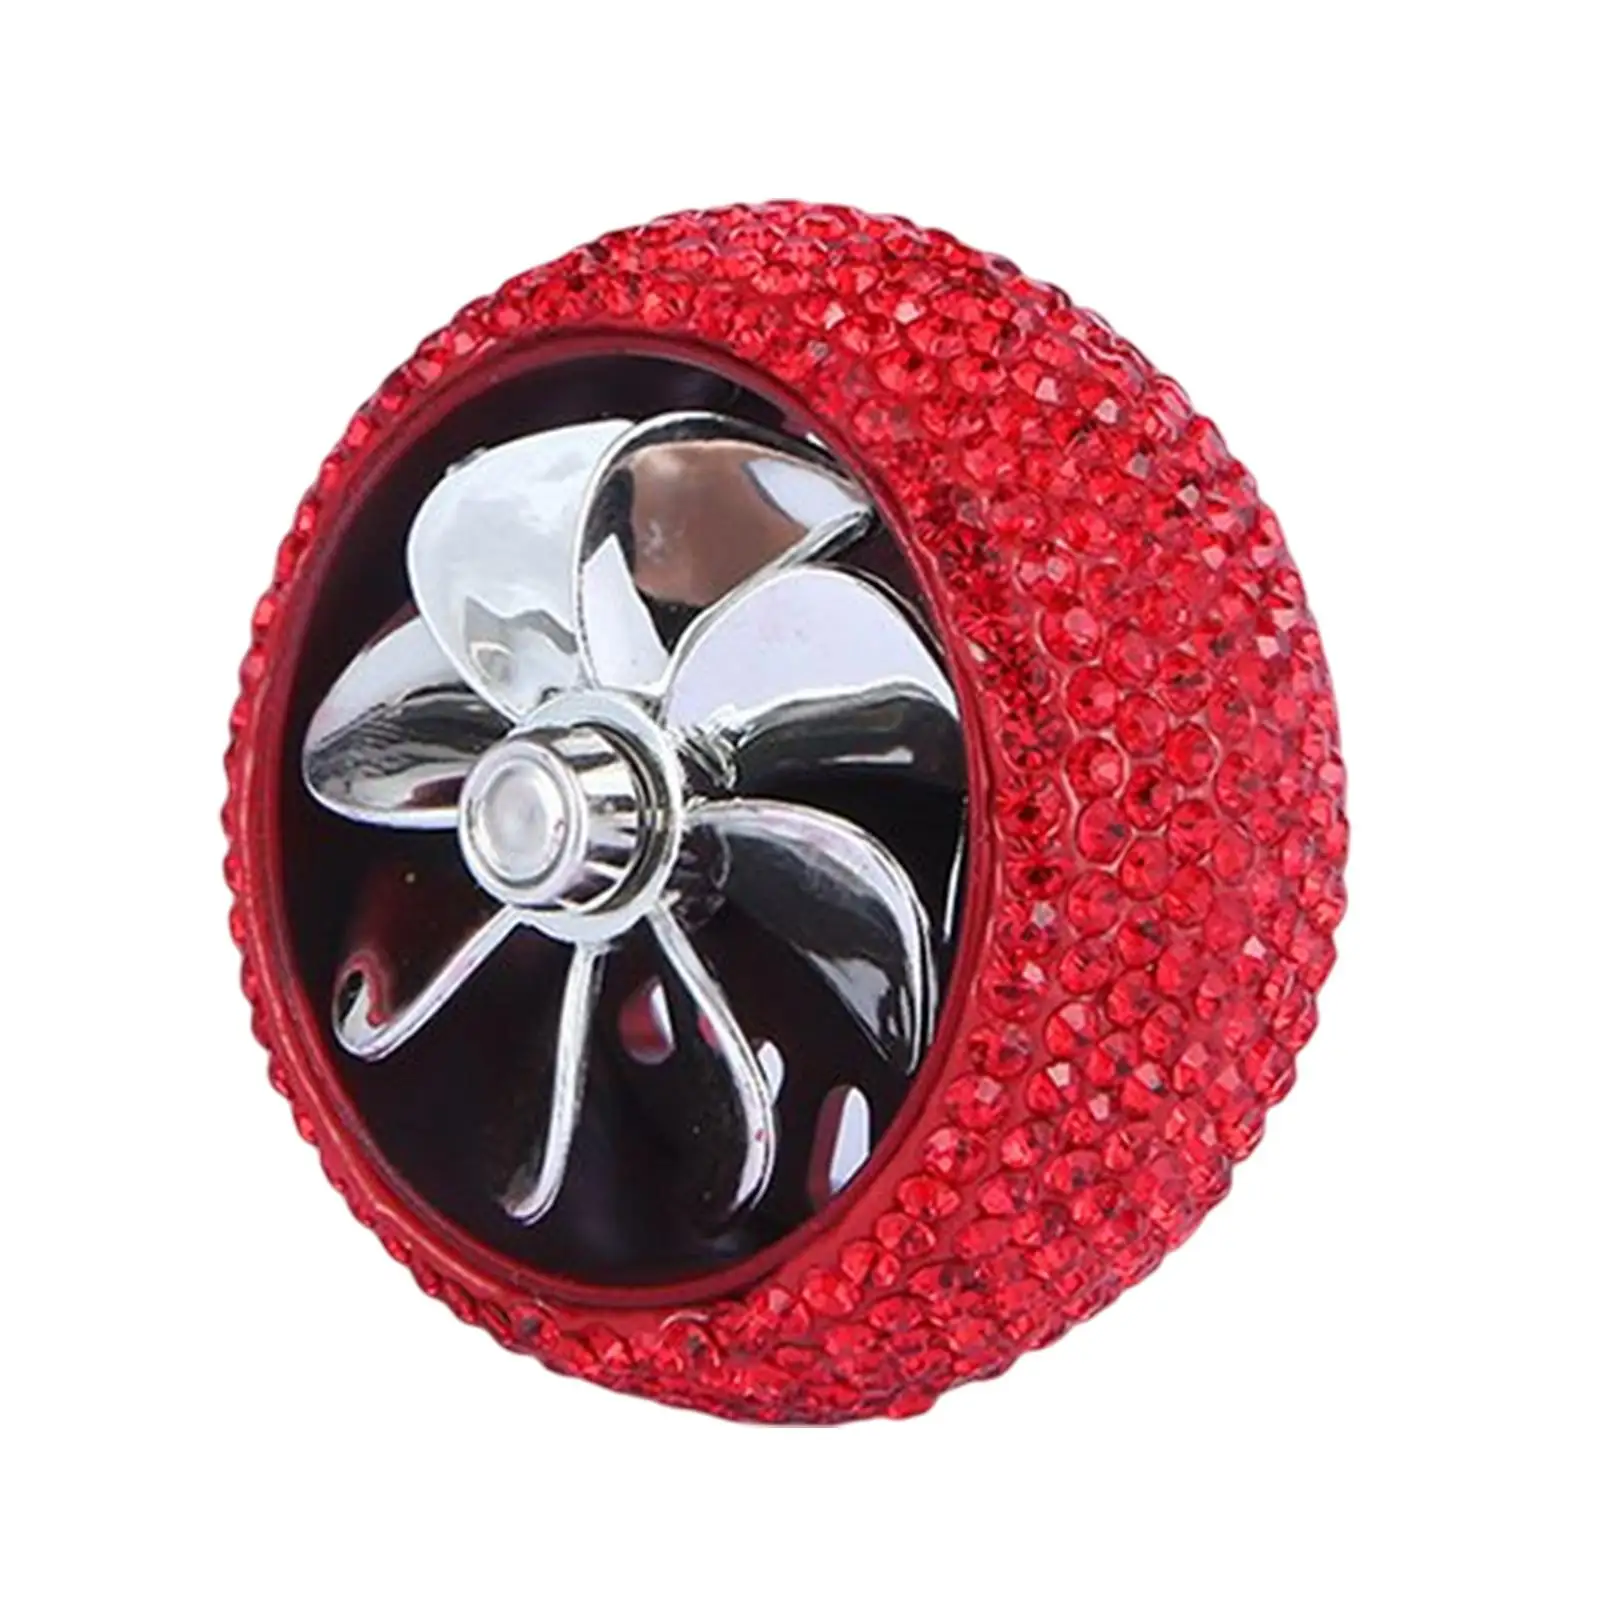 Air Vent Fan Diffuser Decoration Supplies Accessories Auto Ornament Fashion Gift Exquisite Car Air Outlet Clip Aromatherapy